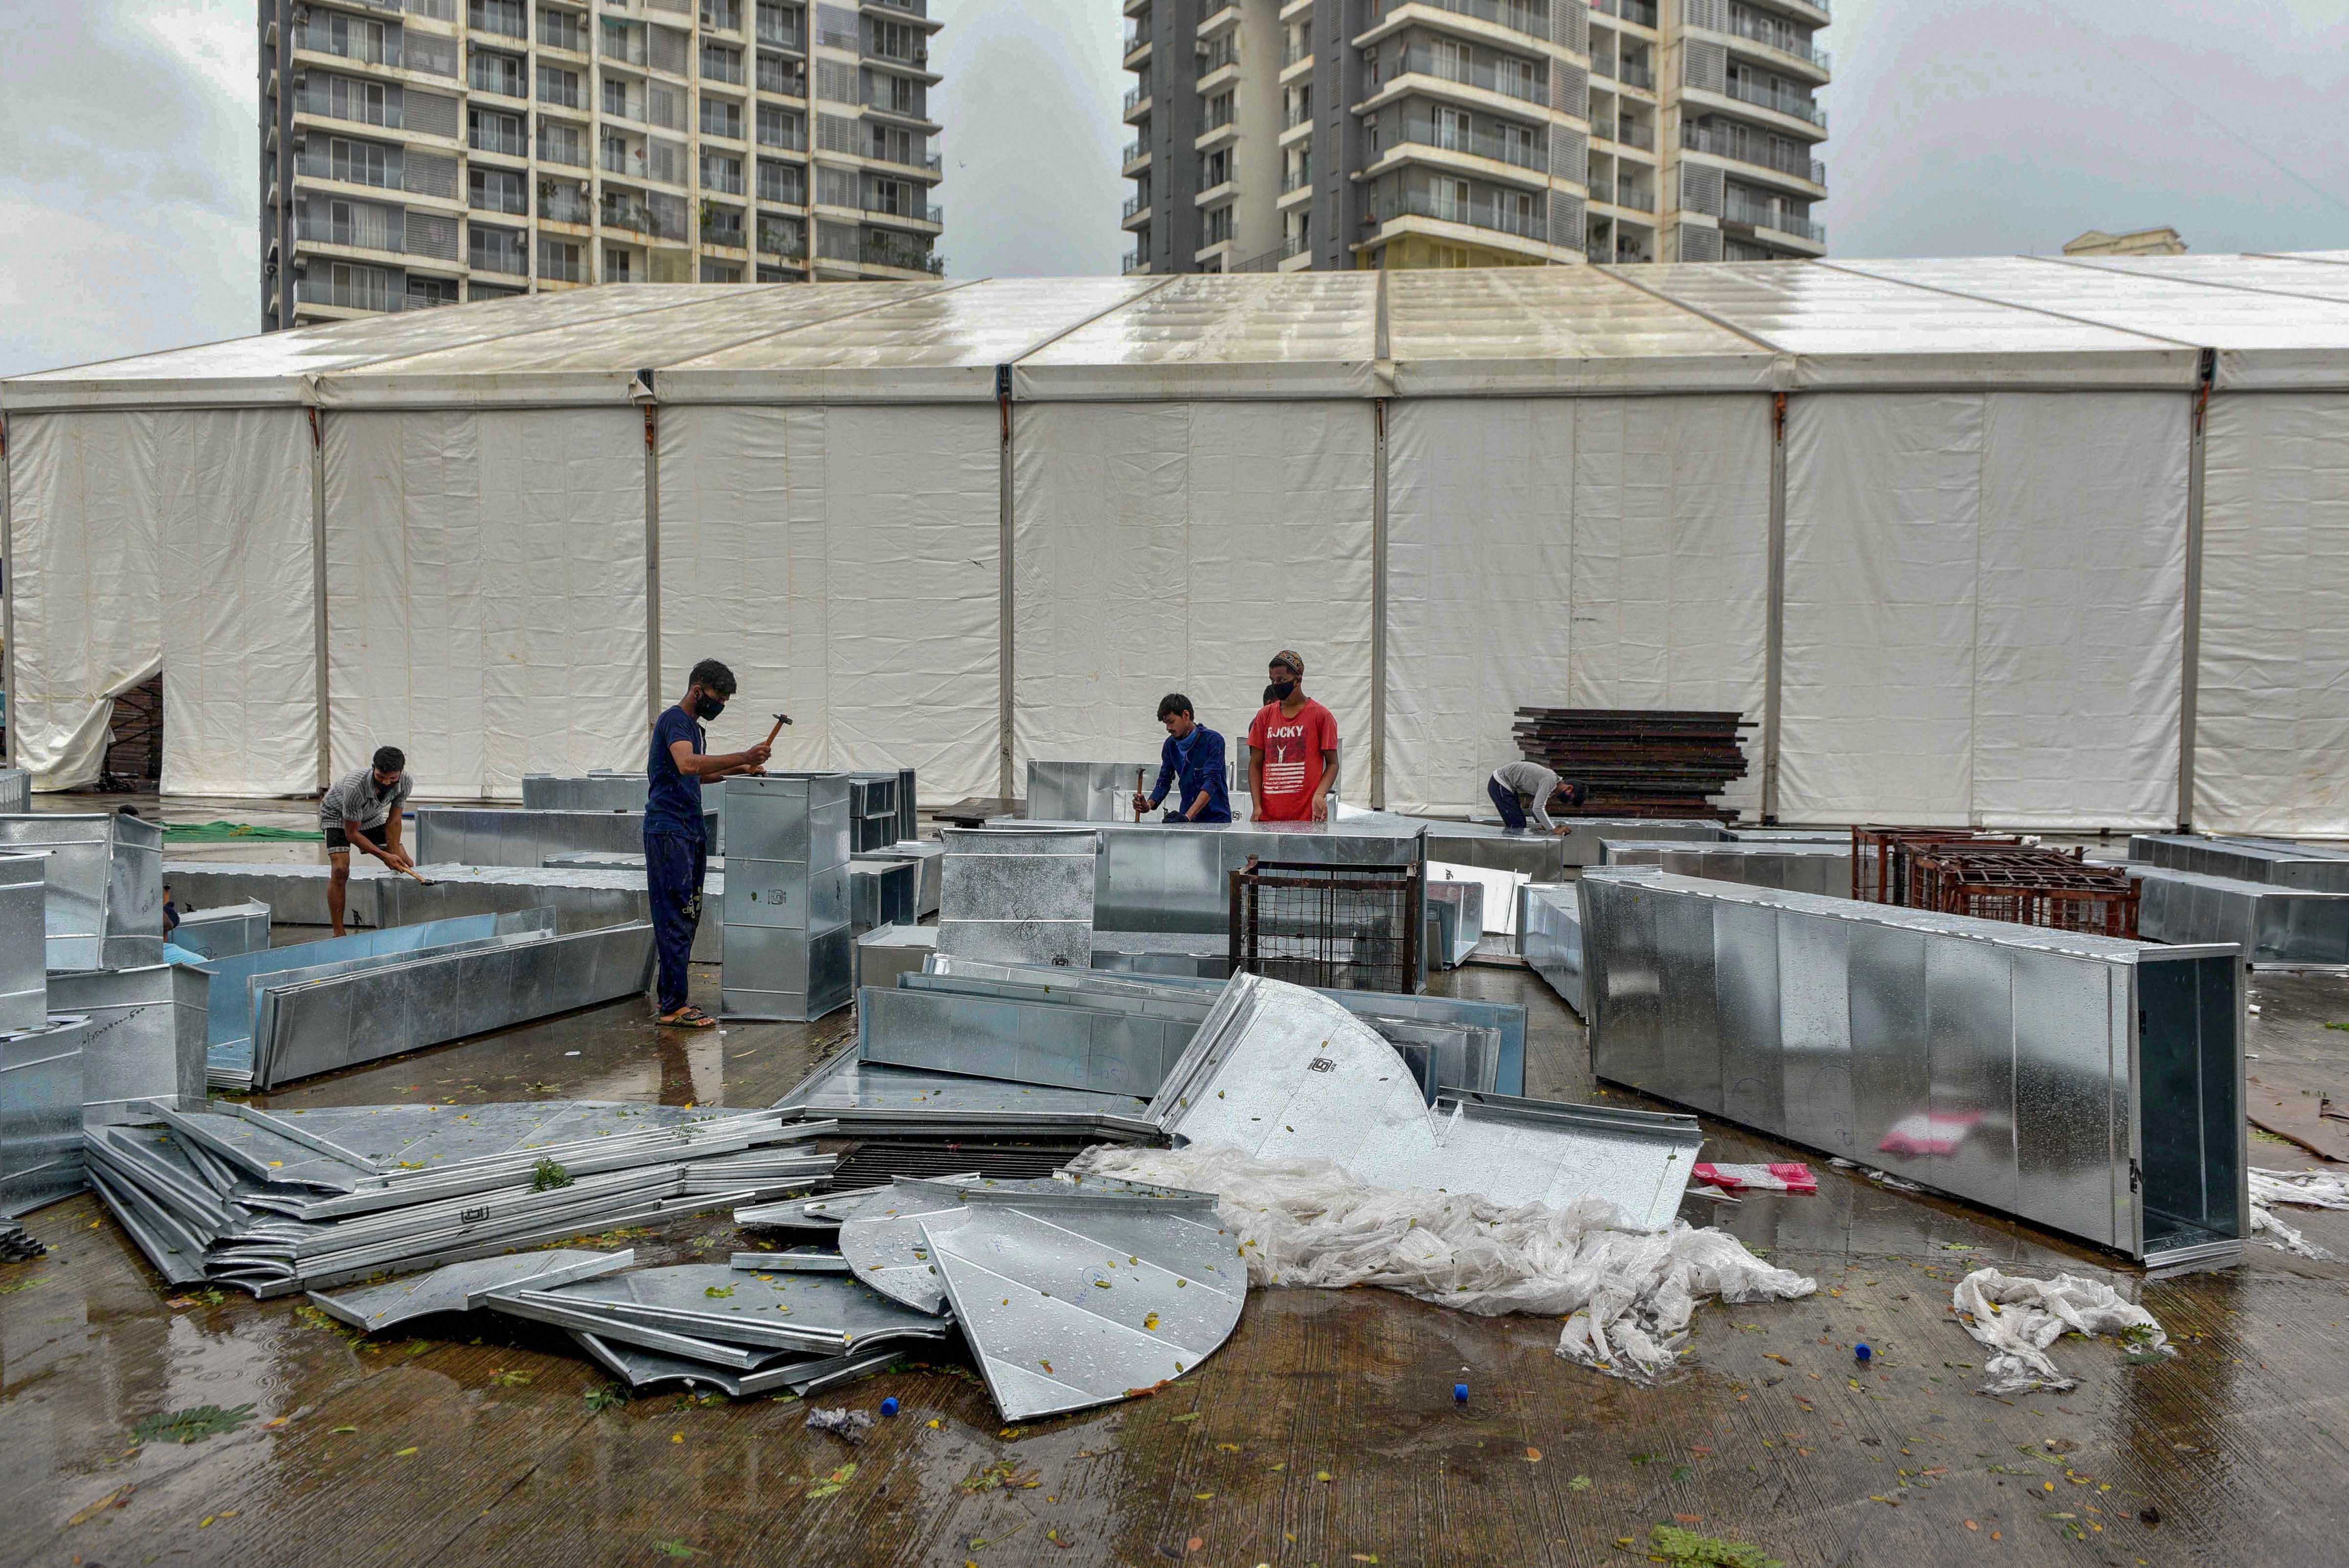 Workers carry material to build an quarantine and hospital facility for treating critical Covid-19 patients, at RTO Kandarpada in Mumbai, Thursday, June 4, 2020.